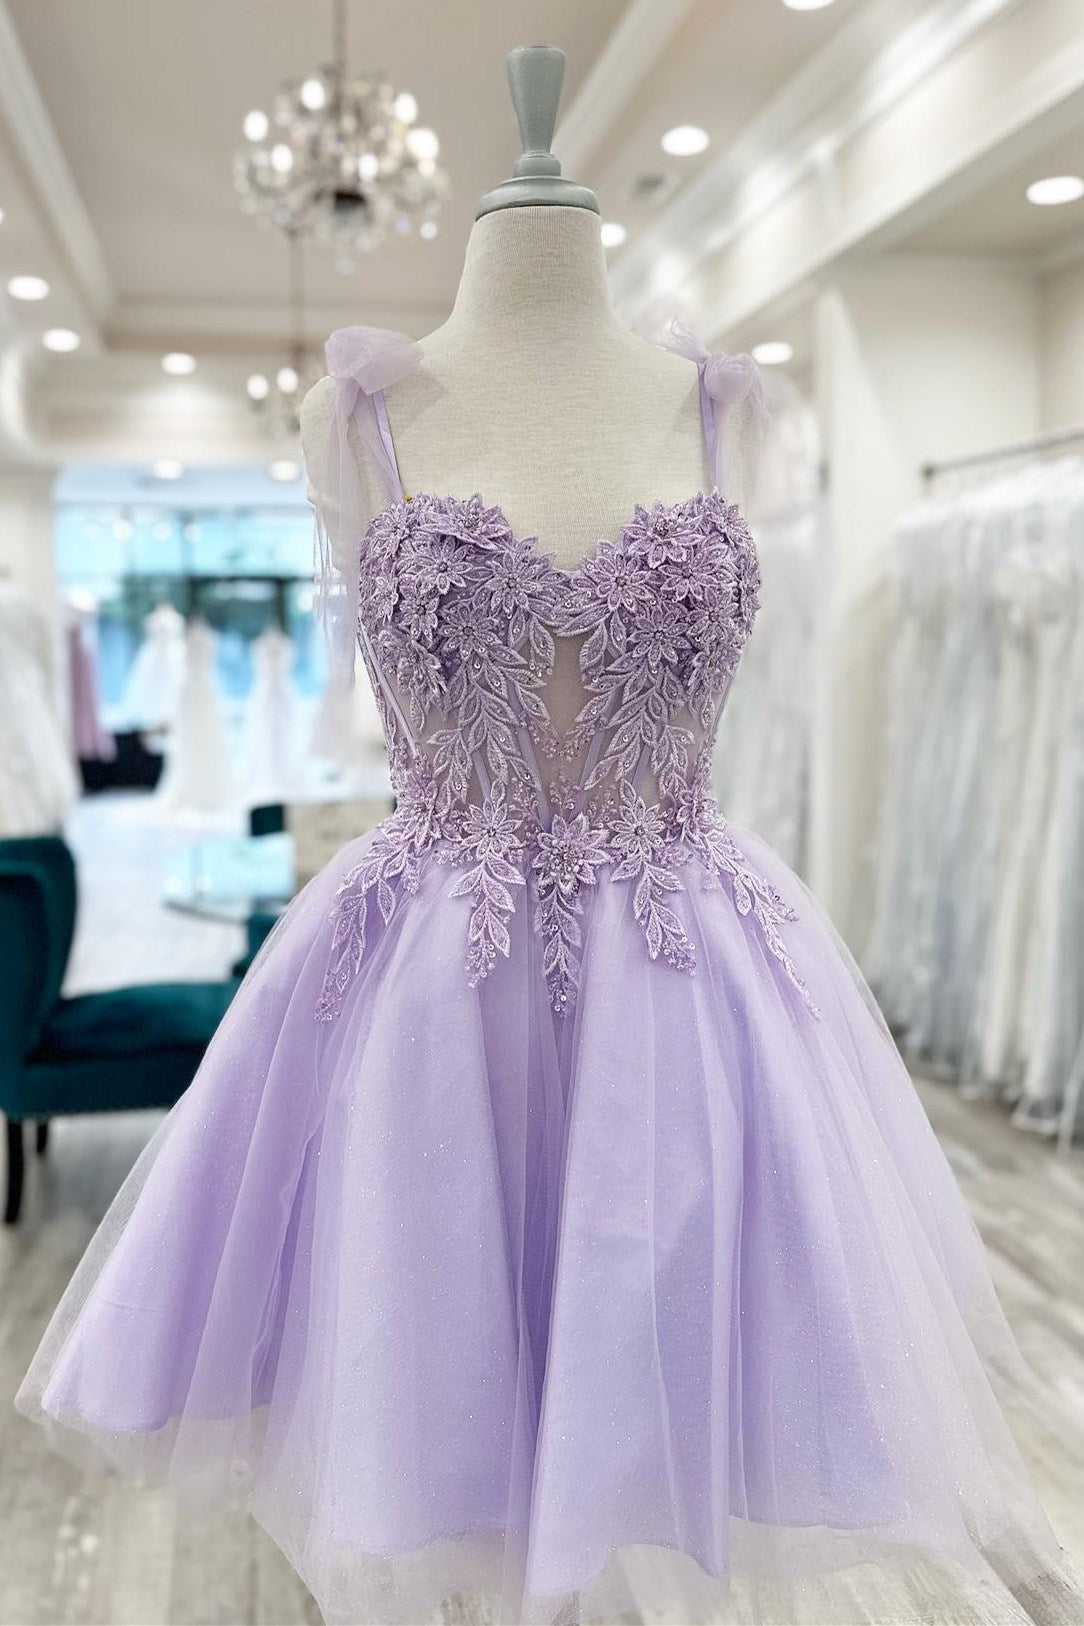 Sierra | Lavender Floral Appliques Sweetheart A-Line Short Homecoming Dress